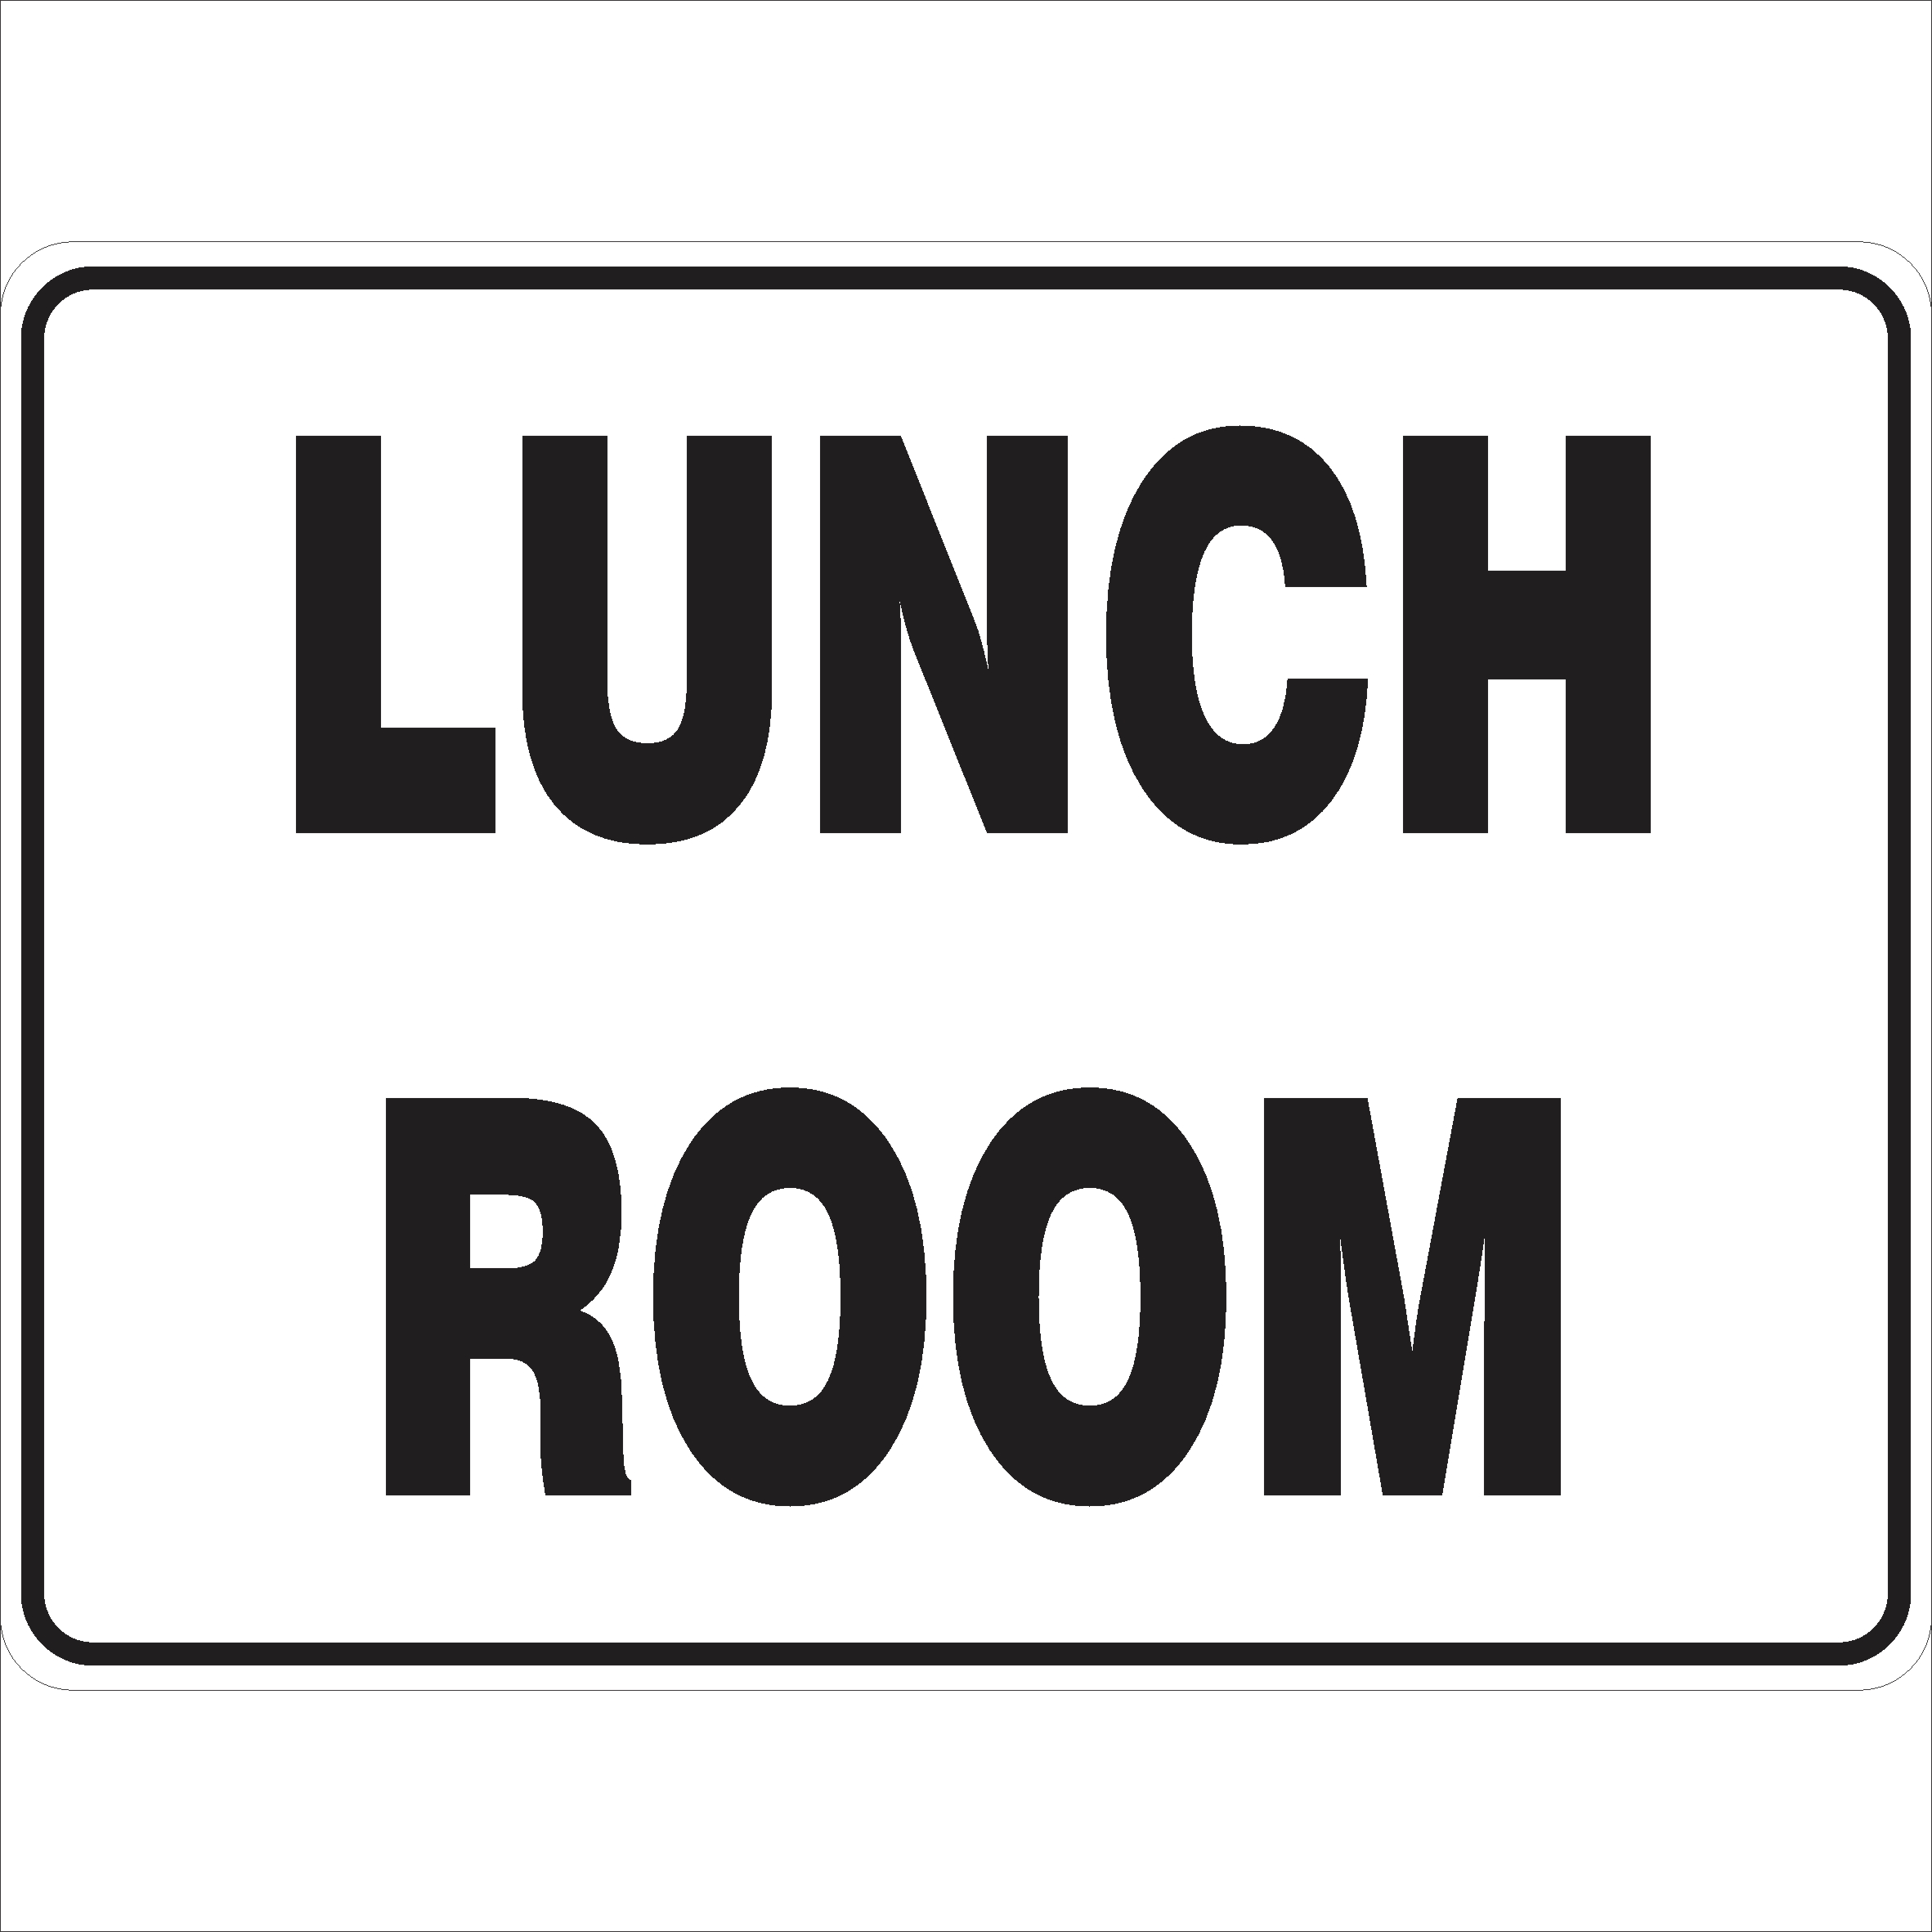 Lunch Room - Safety Sign